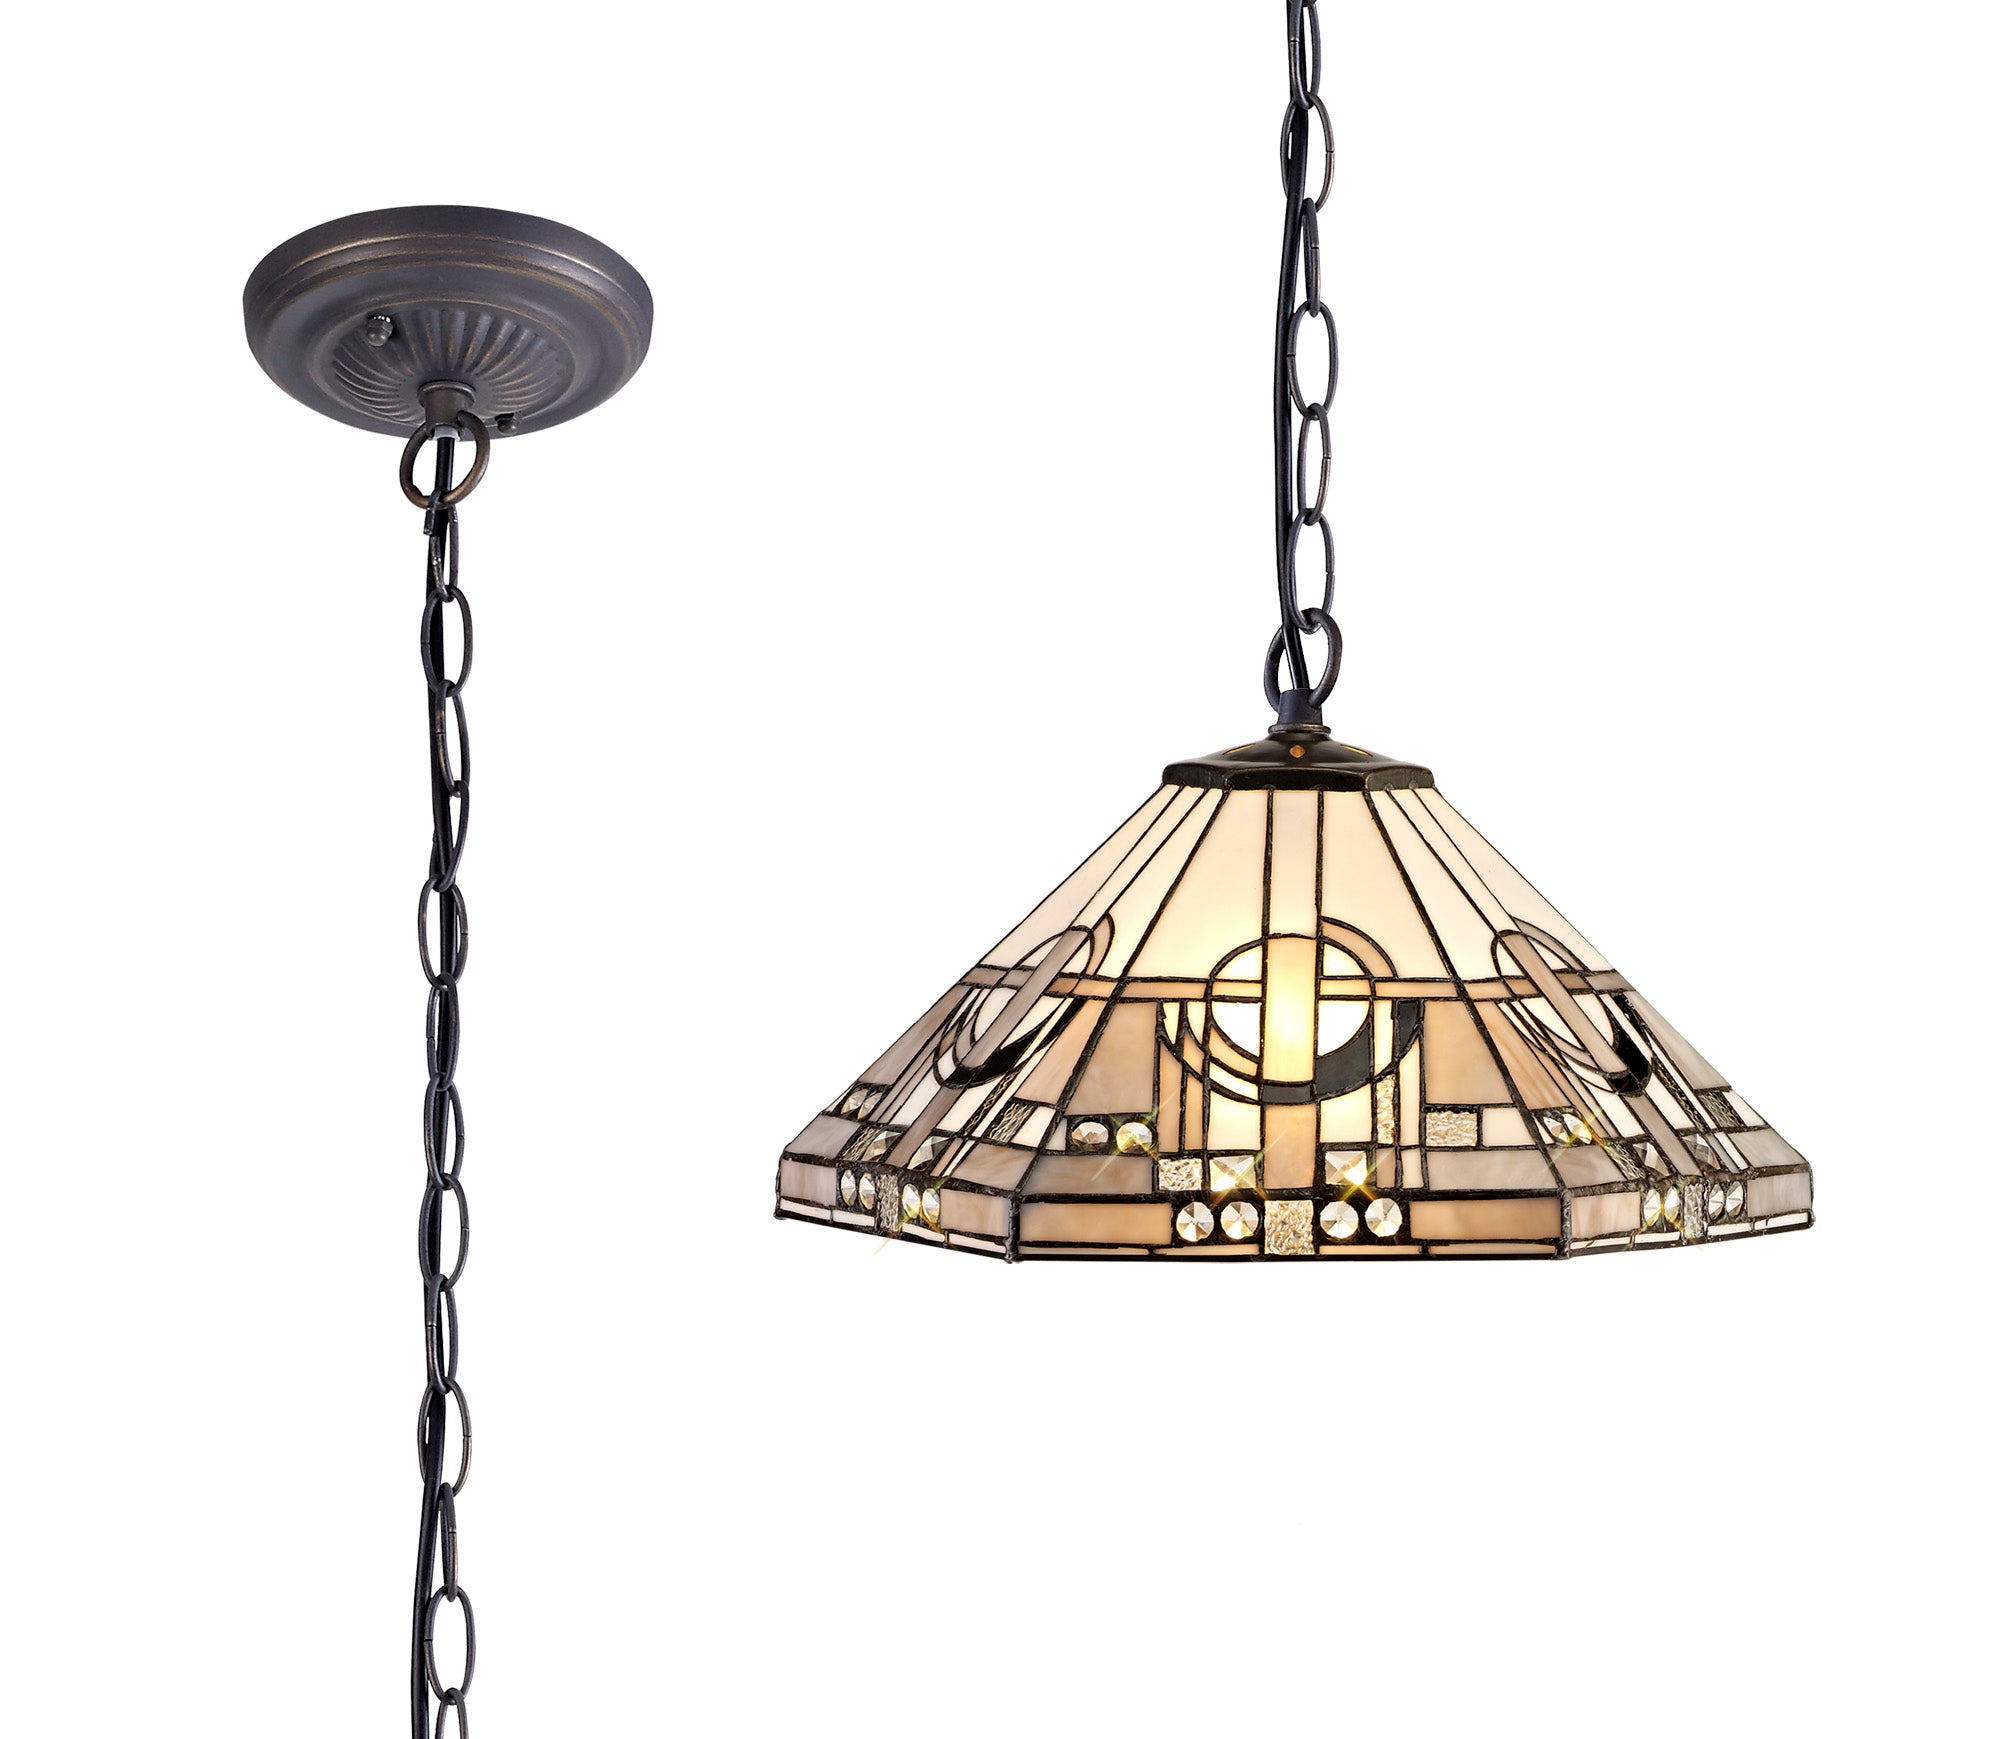 Atek 1 Light Downlighter Pendant E27 With 40cm Tiffany Shade, White/Grey/Black/Clear Crystal/Aged Antique Brass